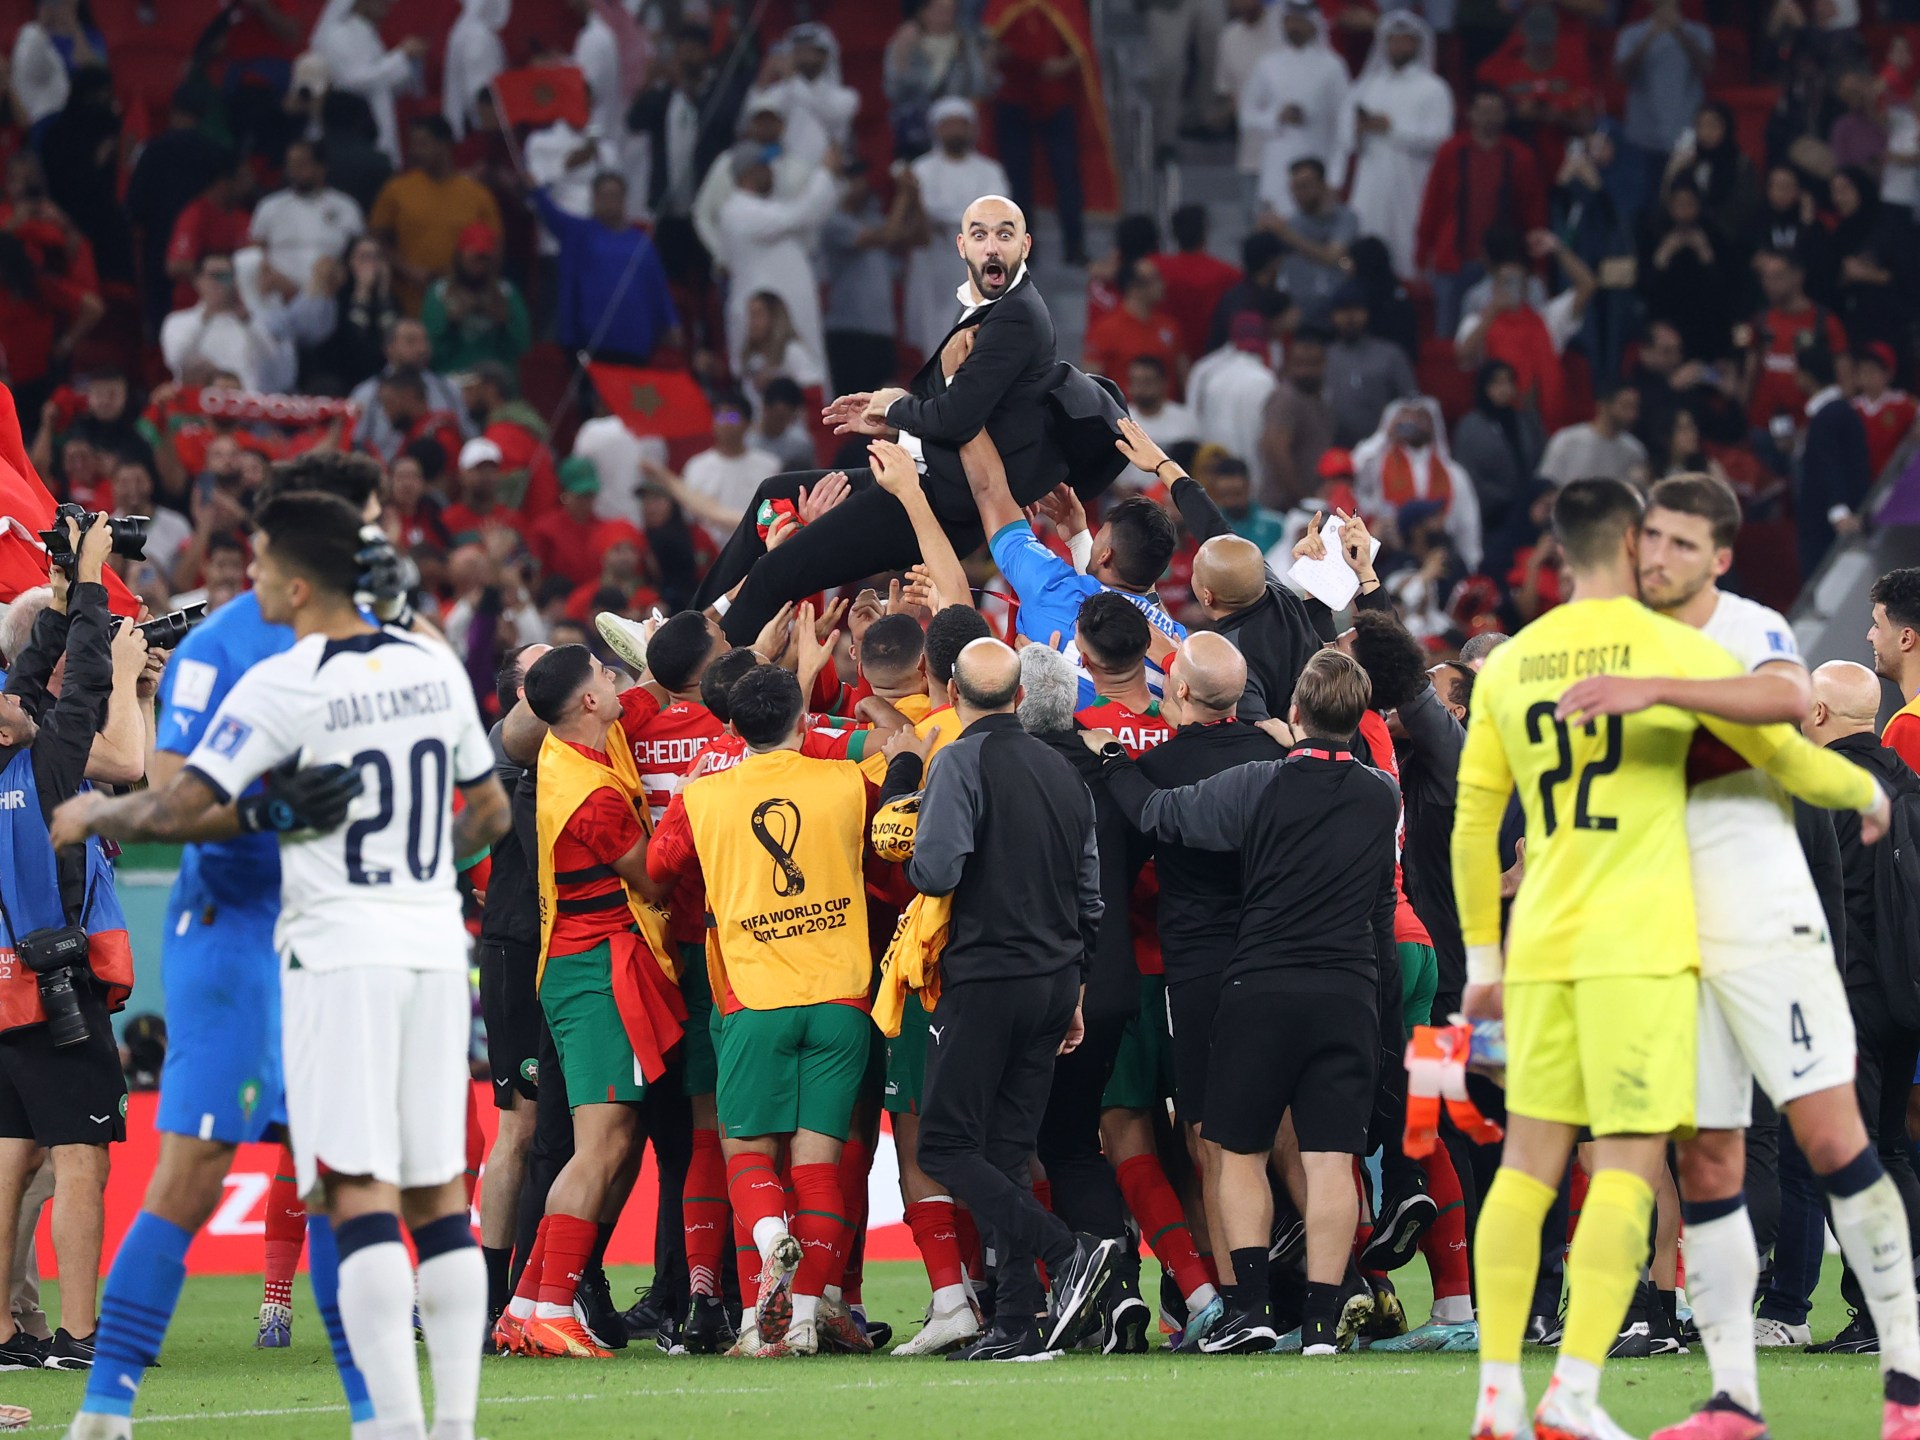 Pictures: One of the best moments of Morocco’s historic World Cup marketing campaign